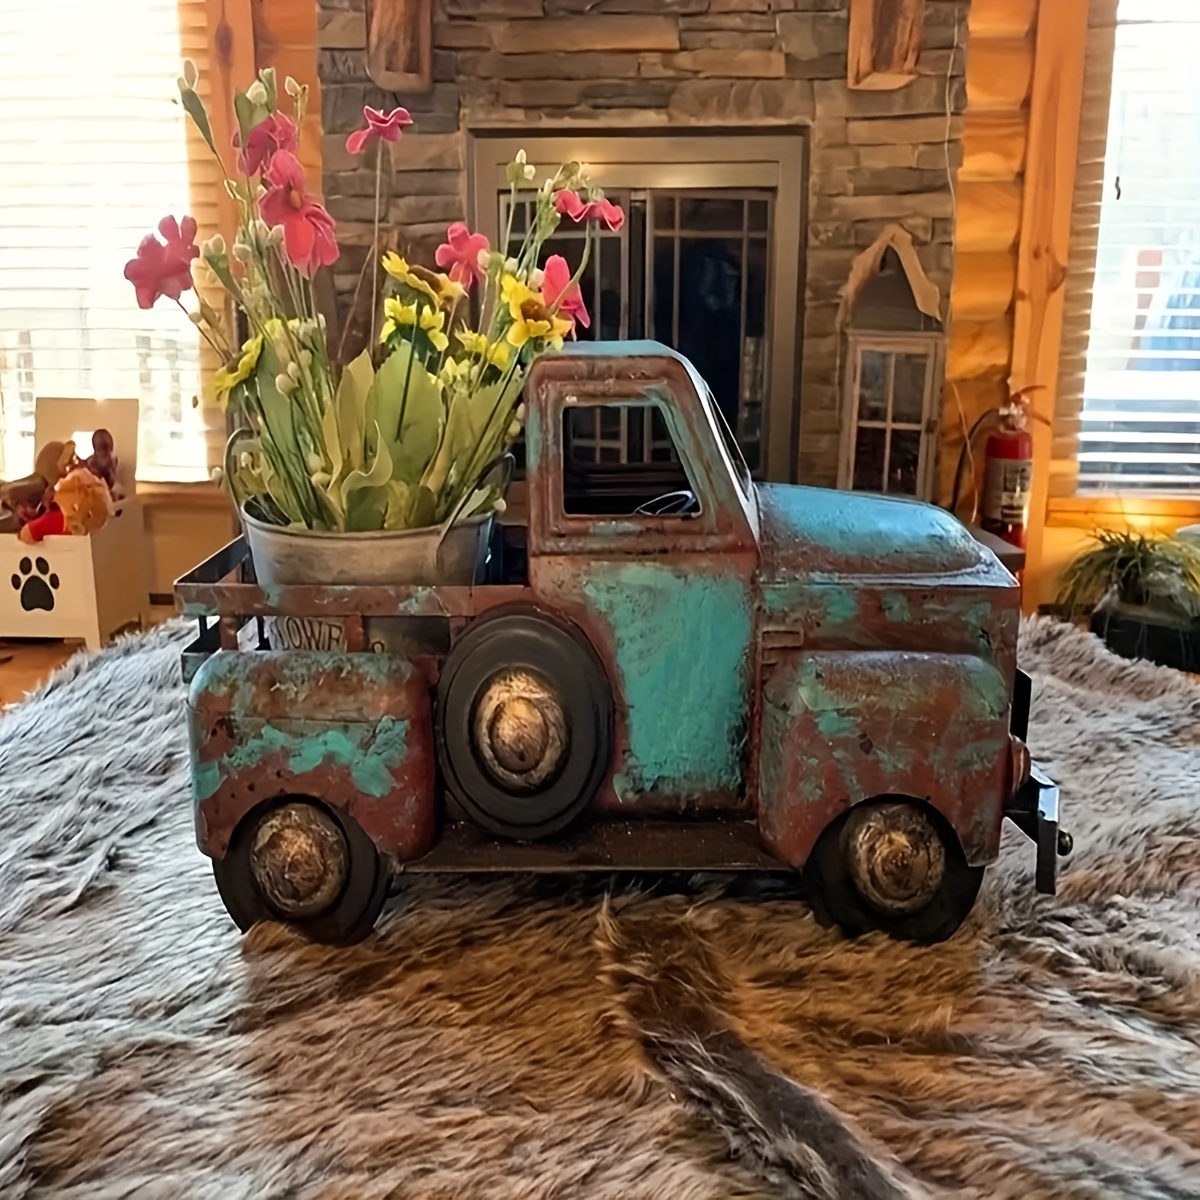 

1pc Vintage Plant Succulent Planter - Rustic Resin Truck Flower Pot, Collectible Vehicle Figurines For Home Bookshelf, Mantel Display, Thanksgiving Decor, For Indoor & Outdoor Use Without Electricity